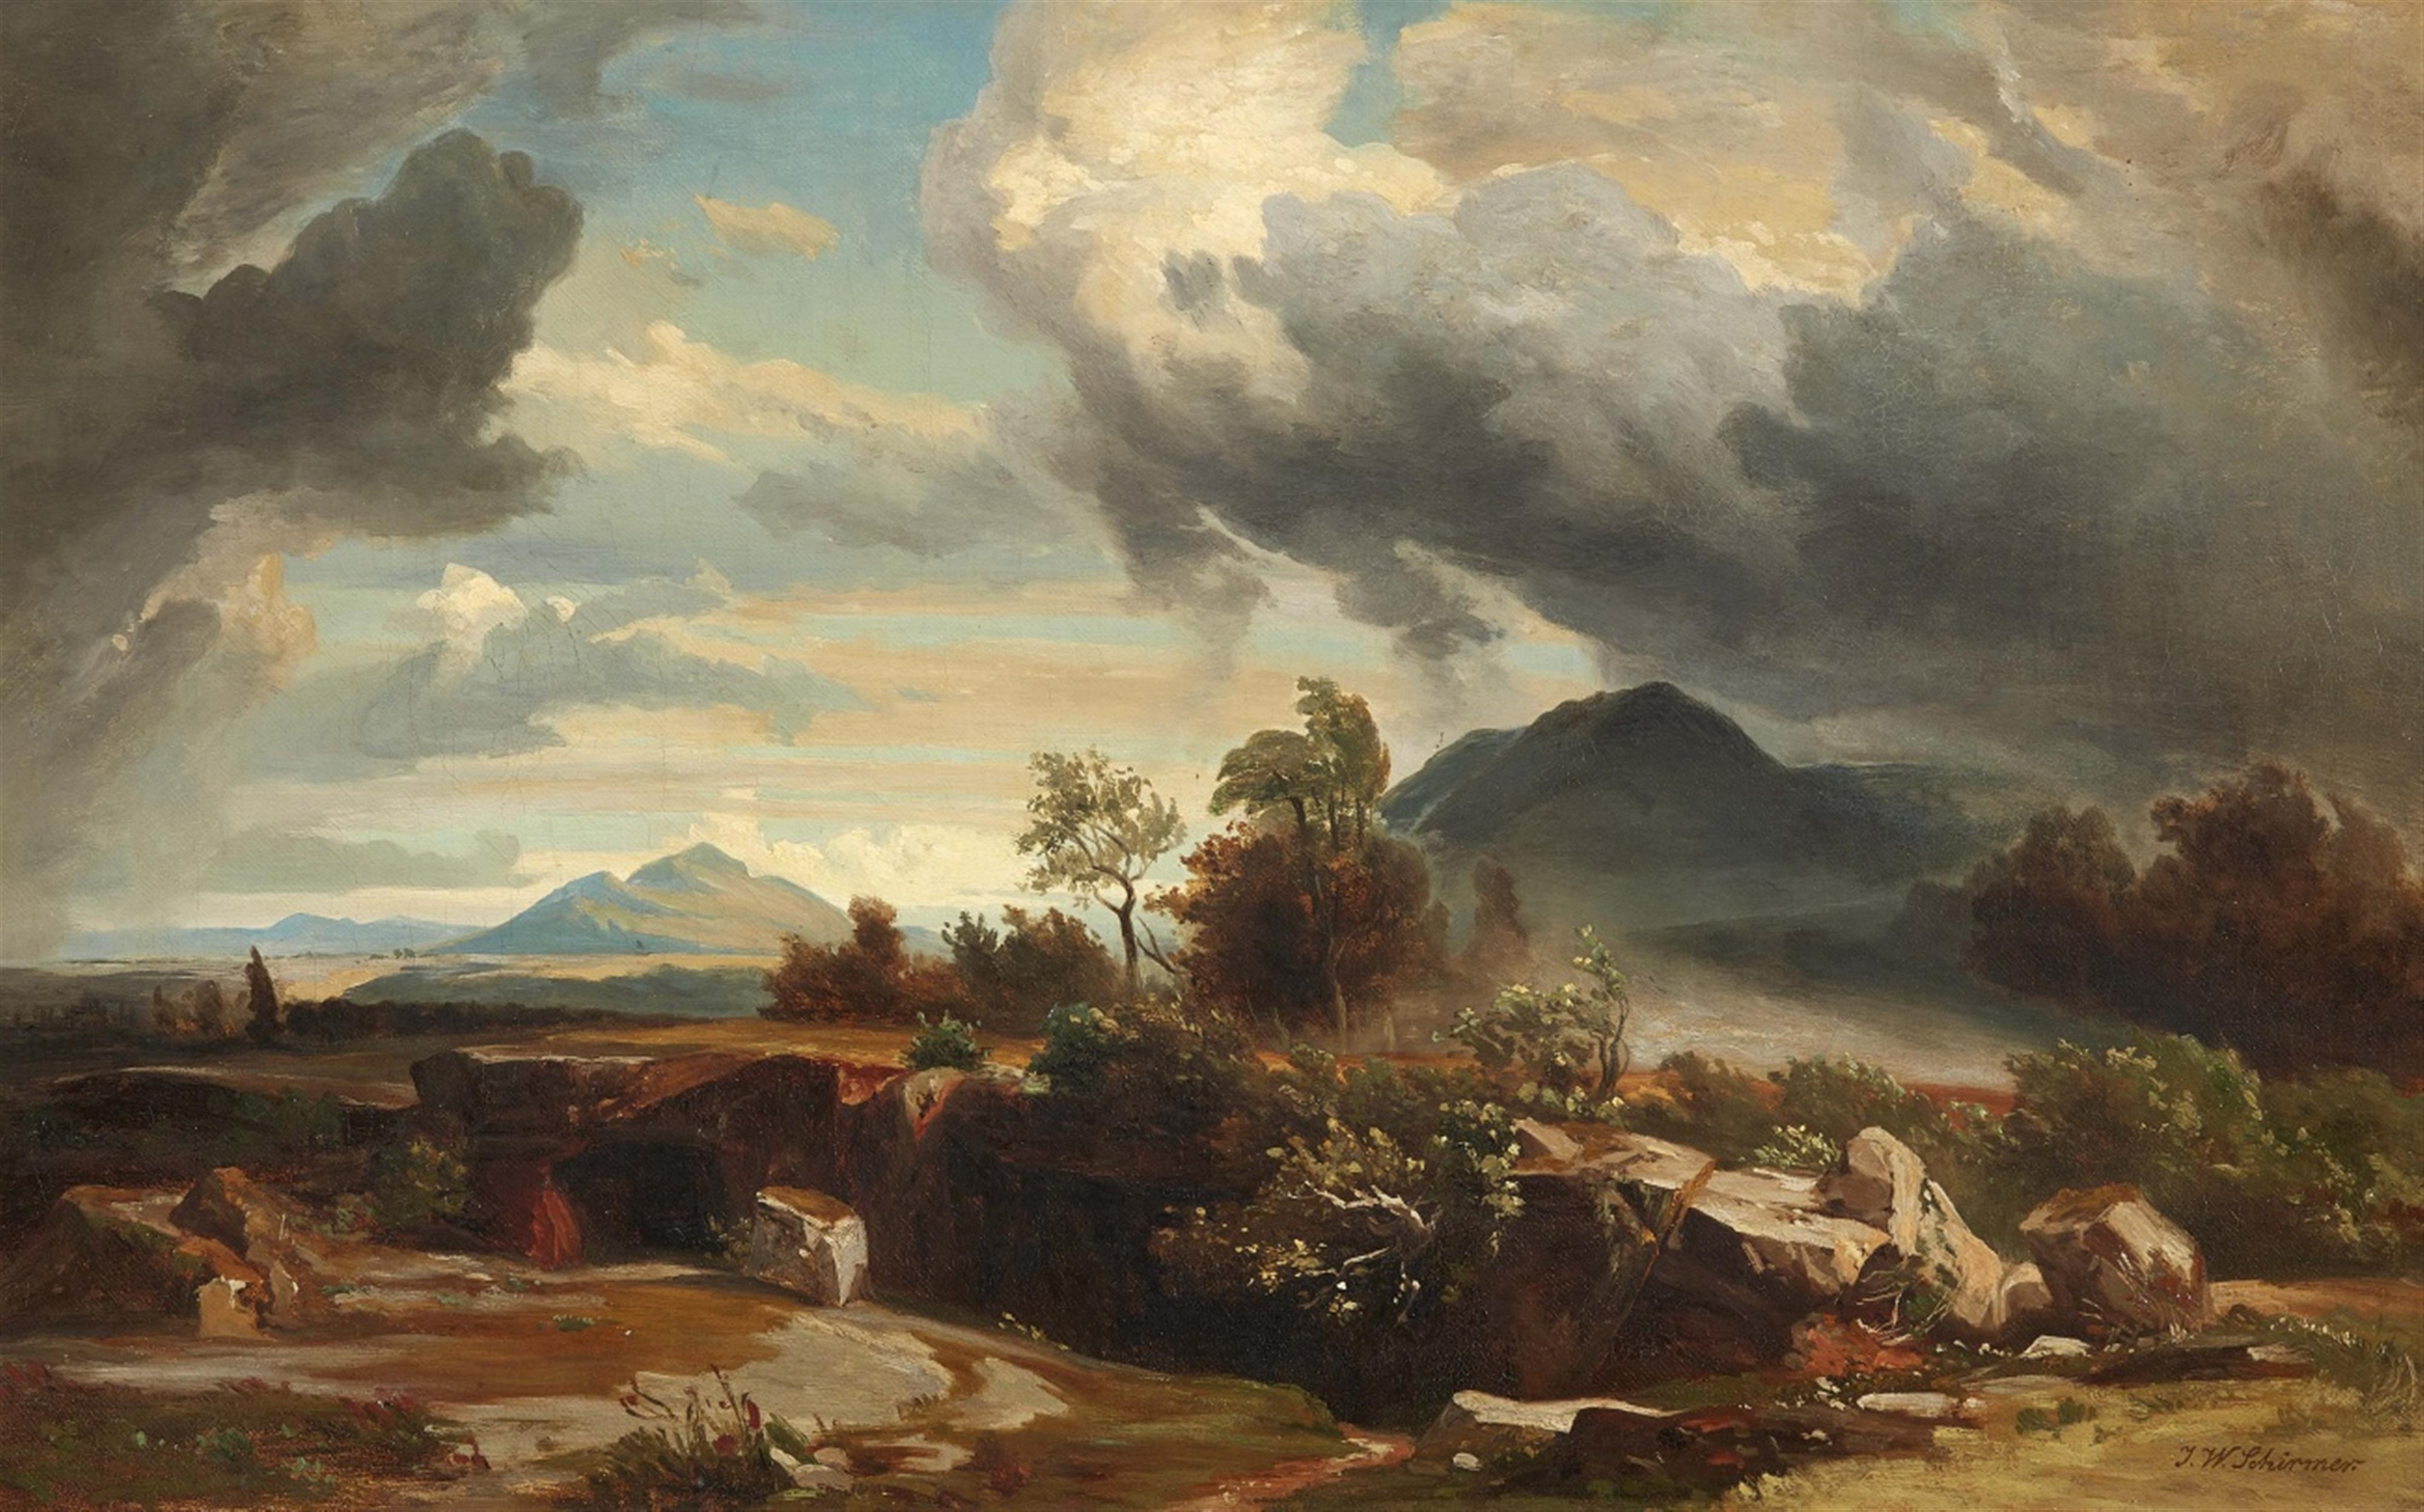 Johann Wilhelm Schirmer, circle of - Approaching Storm in the Roman Campagna - image-1